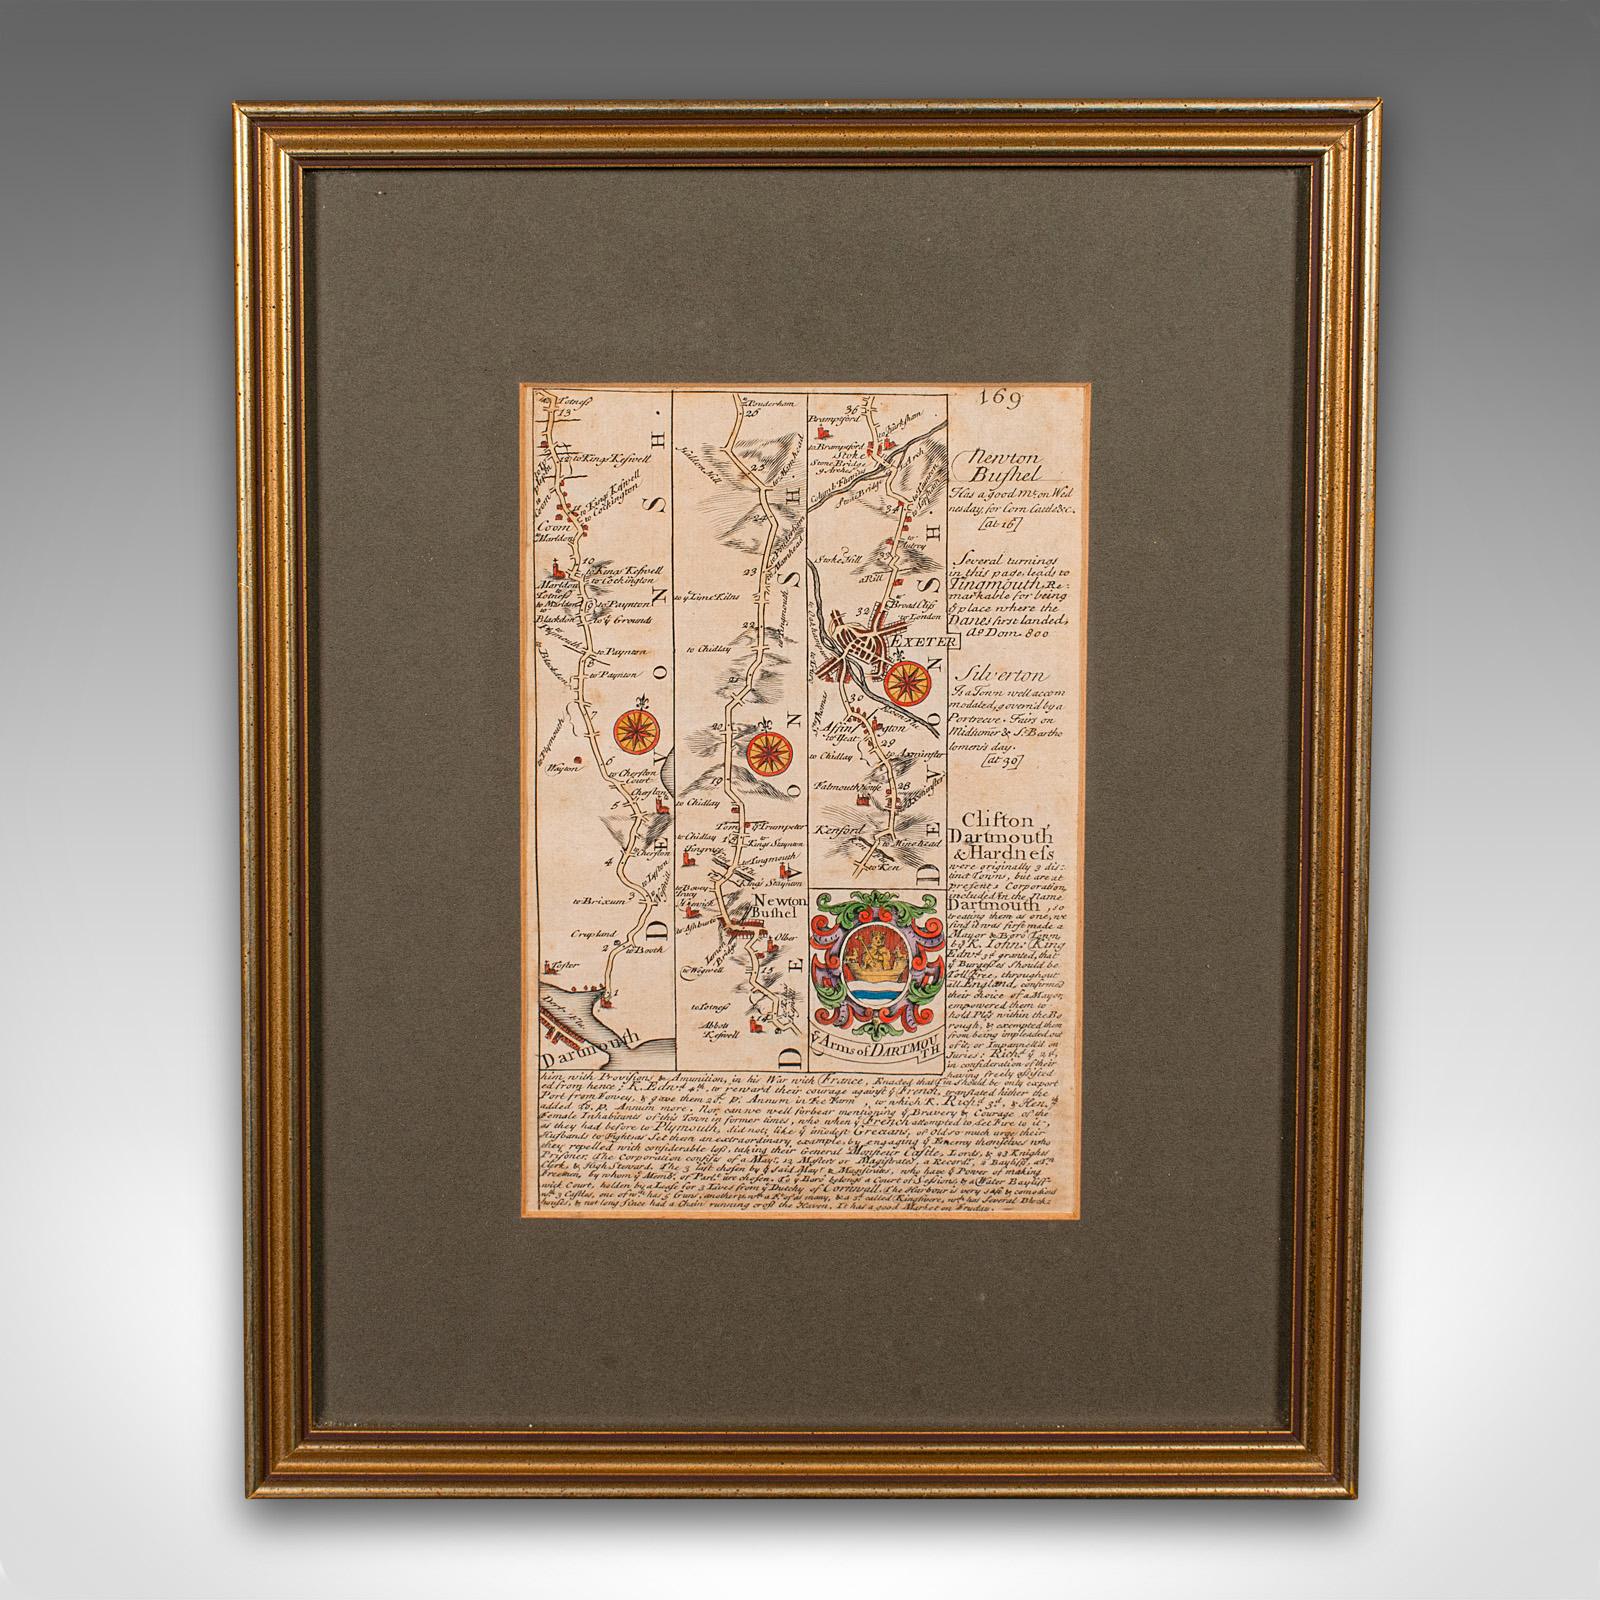 This is an antique coach road map of South Devon. An English, framed lithograph engraving of regional interest, dating to the early 18th century and later.

Delightful early 18th century highway cartography of Dartmouth to Exeter
Displays a